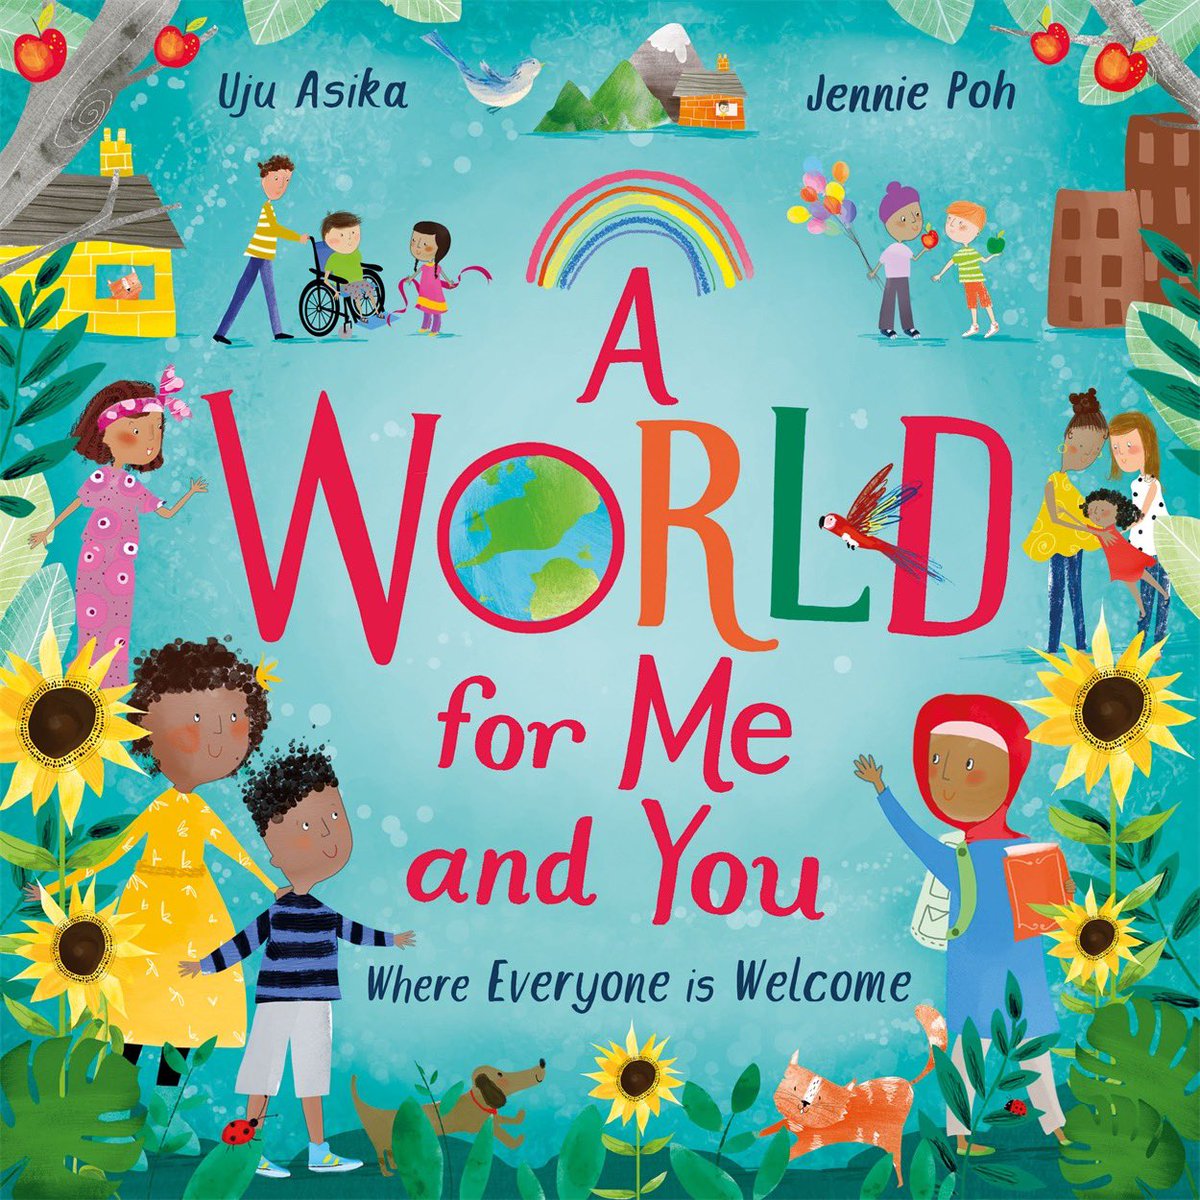 *Cover Reveal* Thrilled to share my first picture book illustrated by the incredible @JenniePoh, celebrating the wonders of diversity and a world where EVERYONE is welcome. Out May 12 and available for preorders here: geni.us/WorldForMeAndY… #coverreveal #picturebook